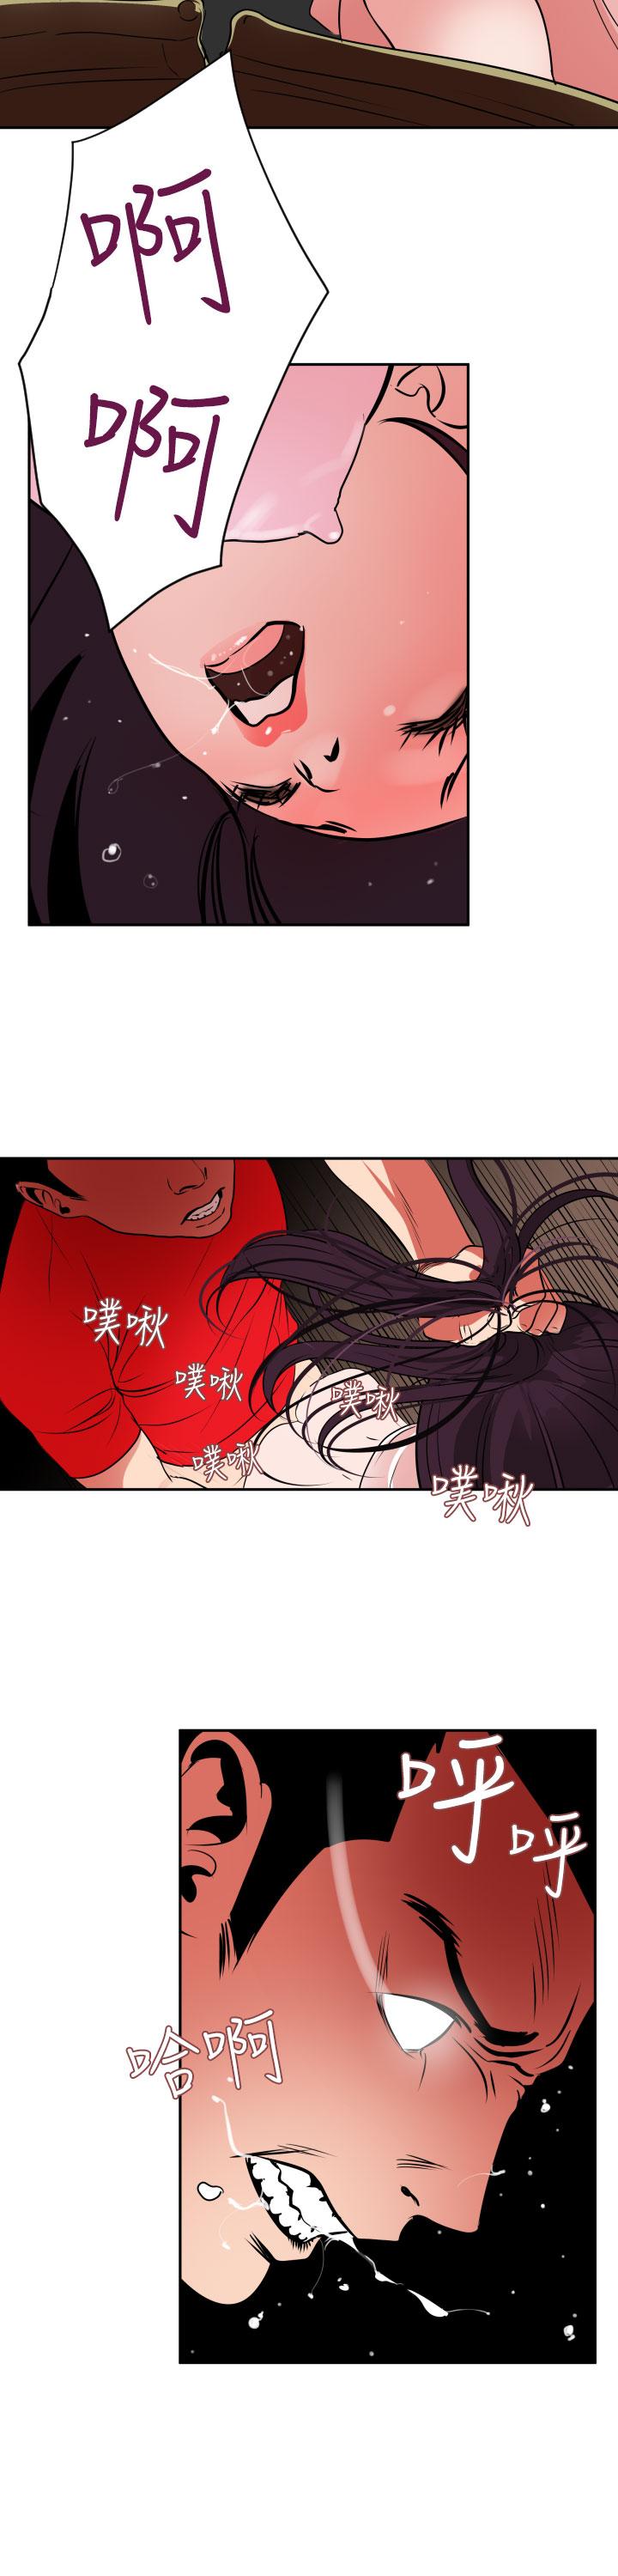 Desire King (慾求王) Ch.1-16 (chinese) 356